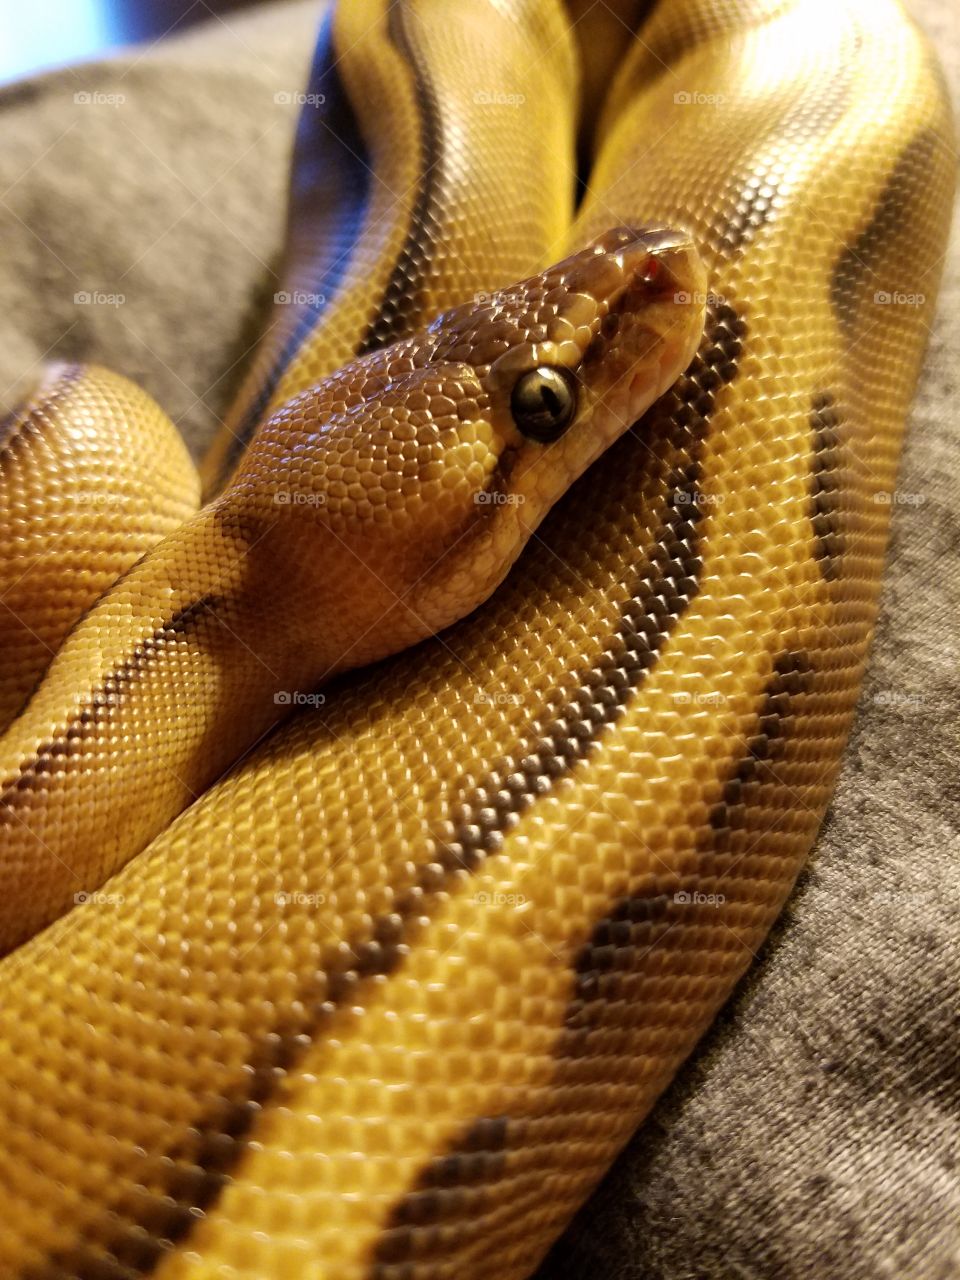 My ball python Macchiato relaxing on my pillow. She's still a baby.